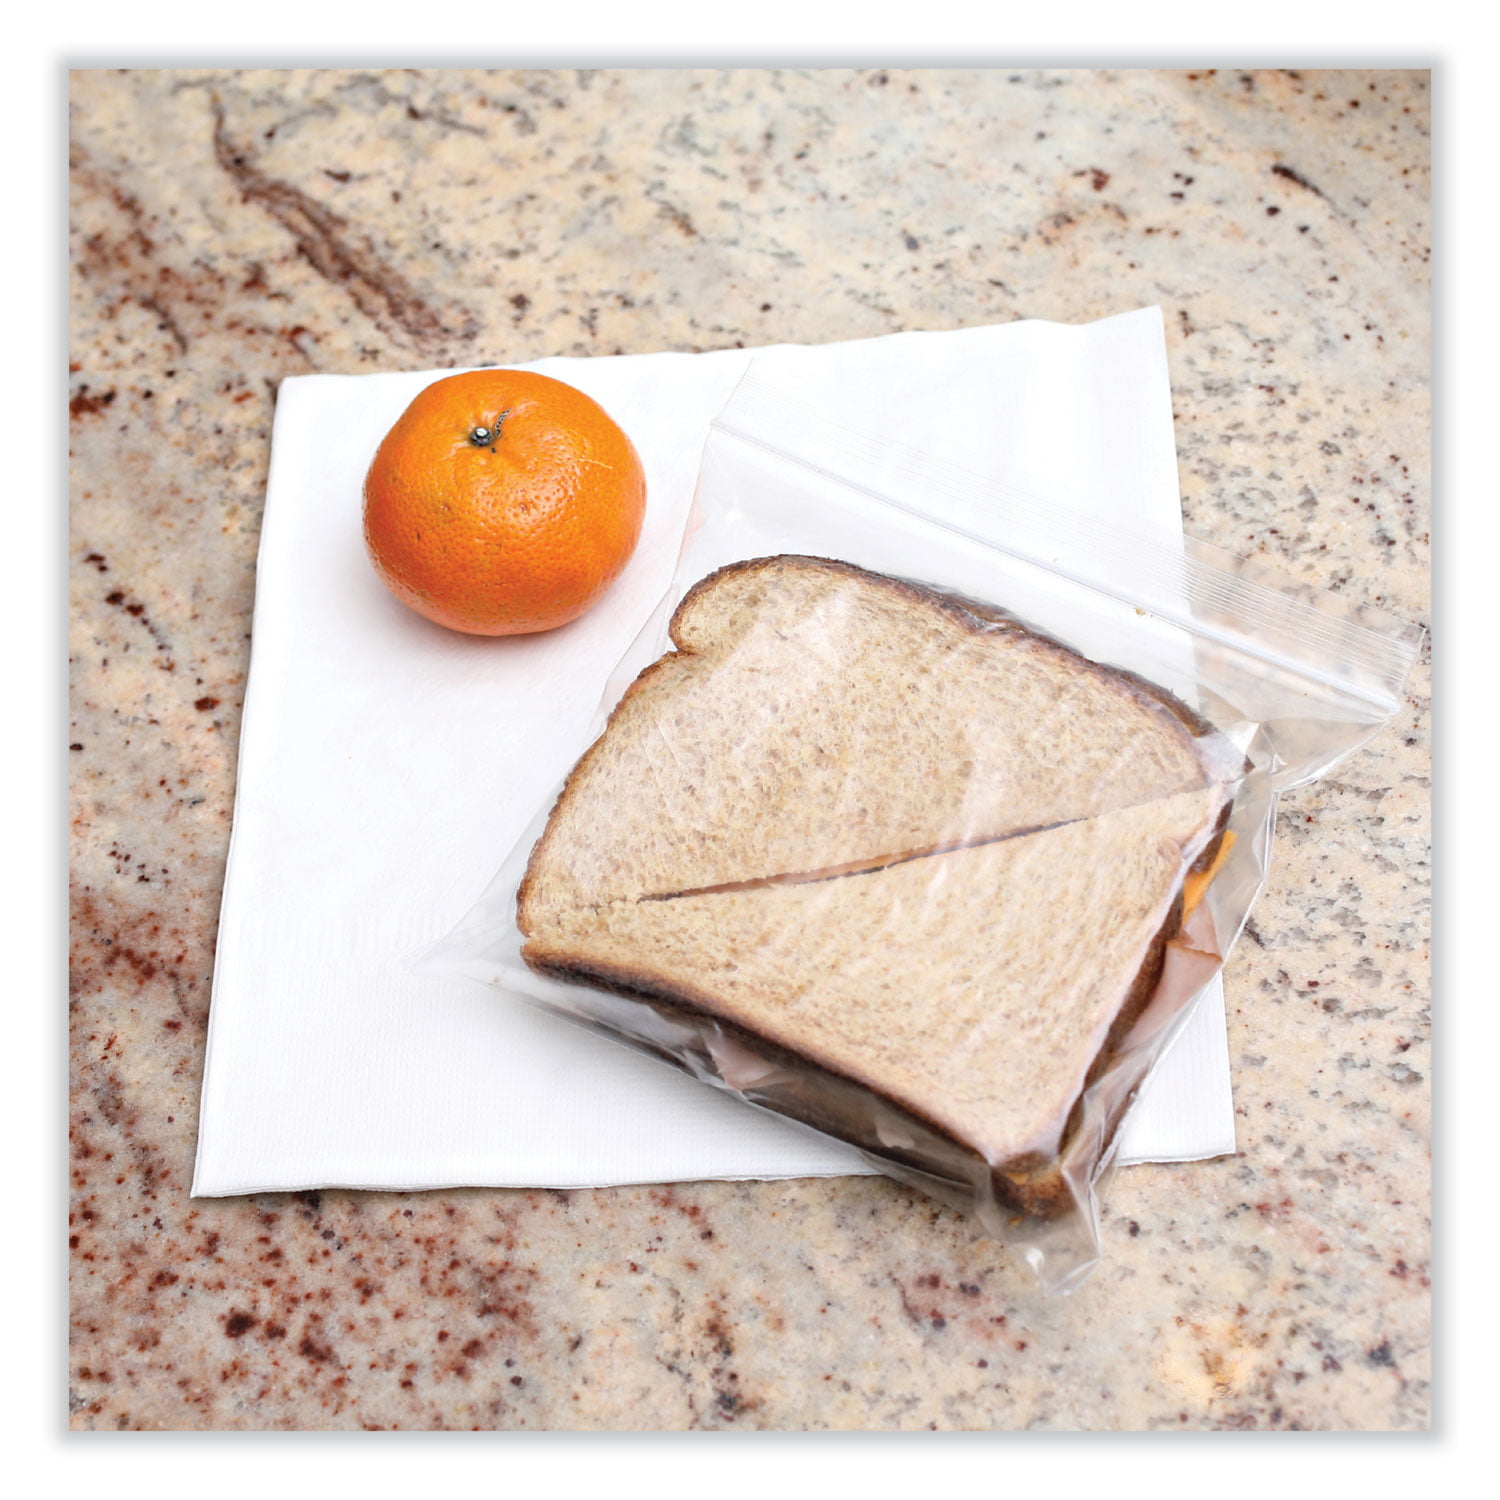 Cryovac® Brand Resealable Sandwich Bags Retail (100946906)